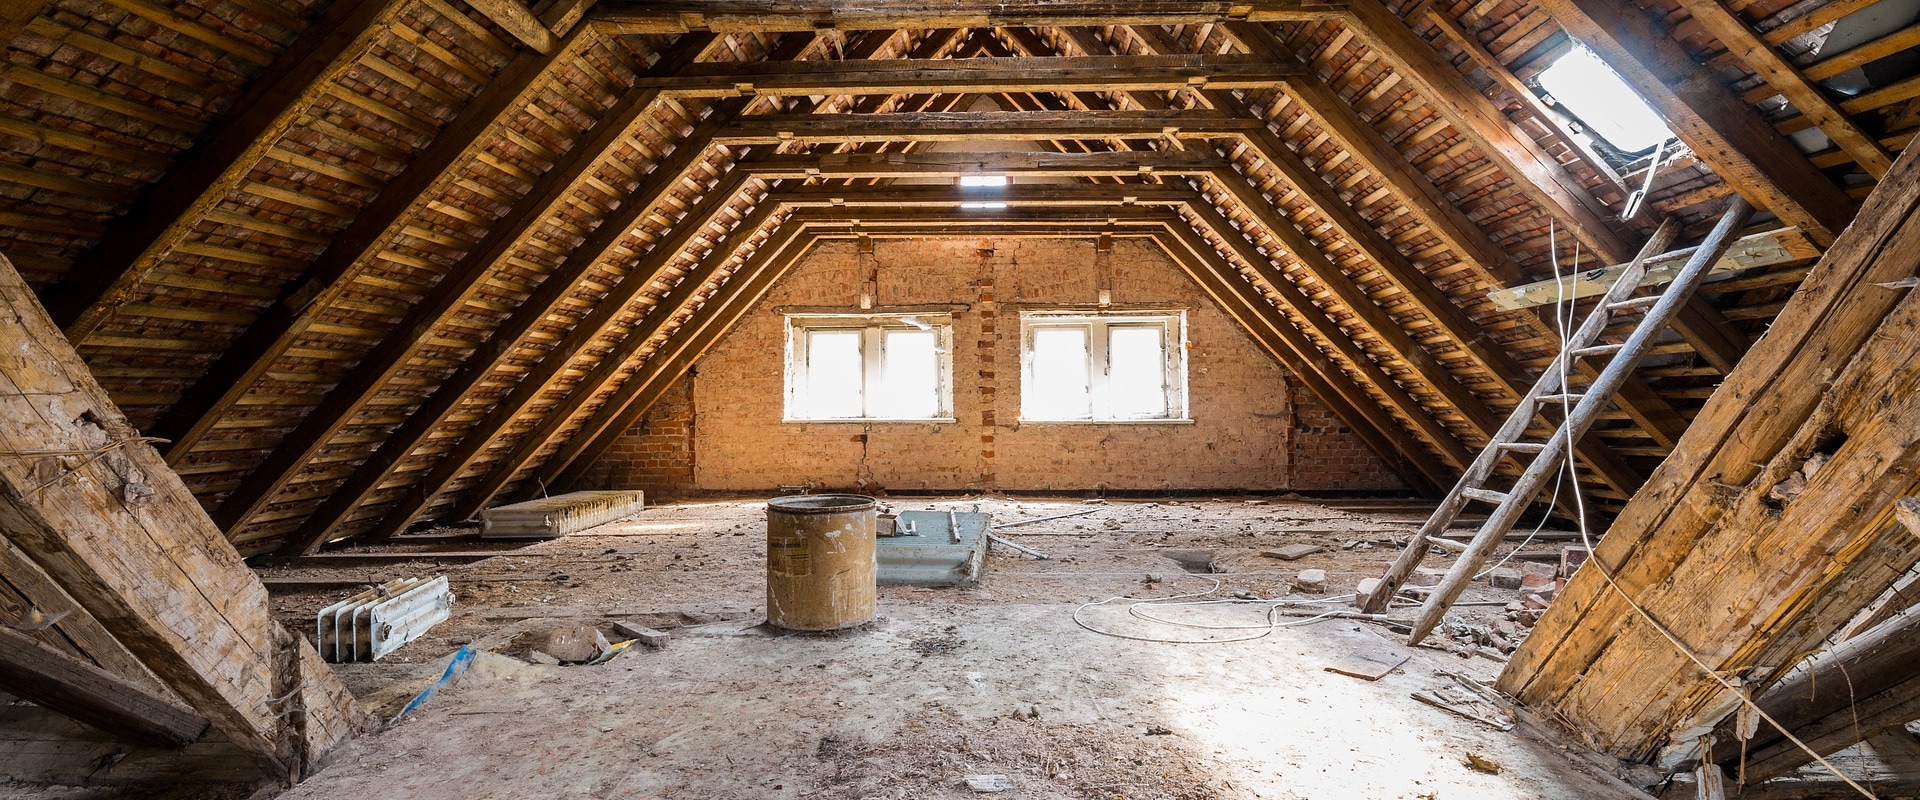 Installing Attic Insulation: What You Need to Know